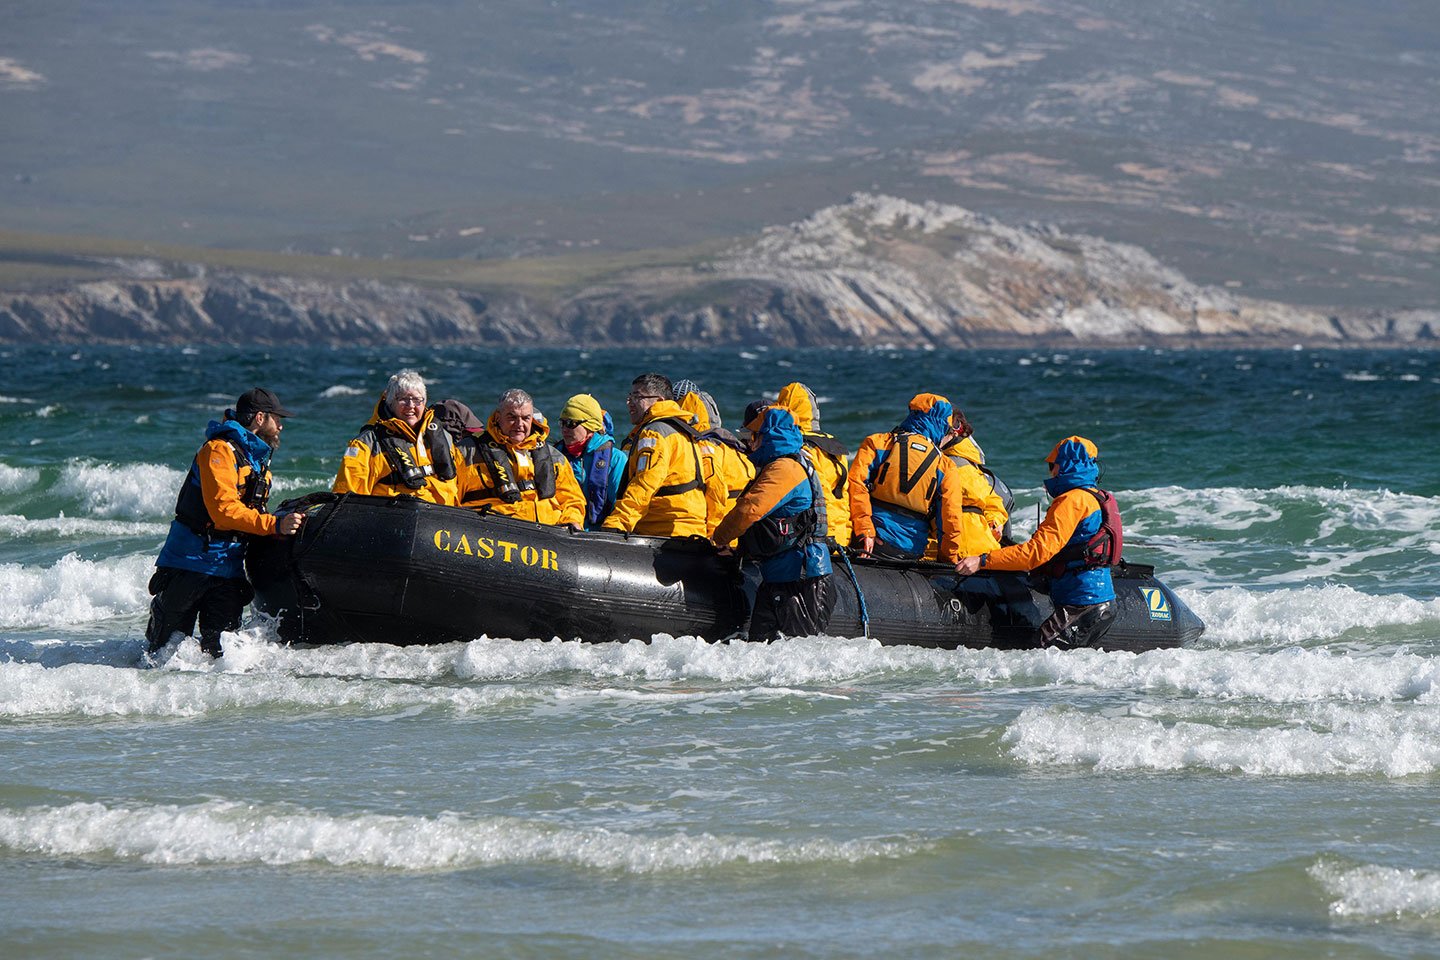 Quark Expeditions guests  on a Zodiac tour approach Saunders Island, Falkland Islands.